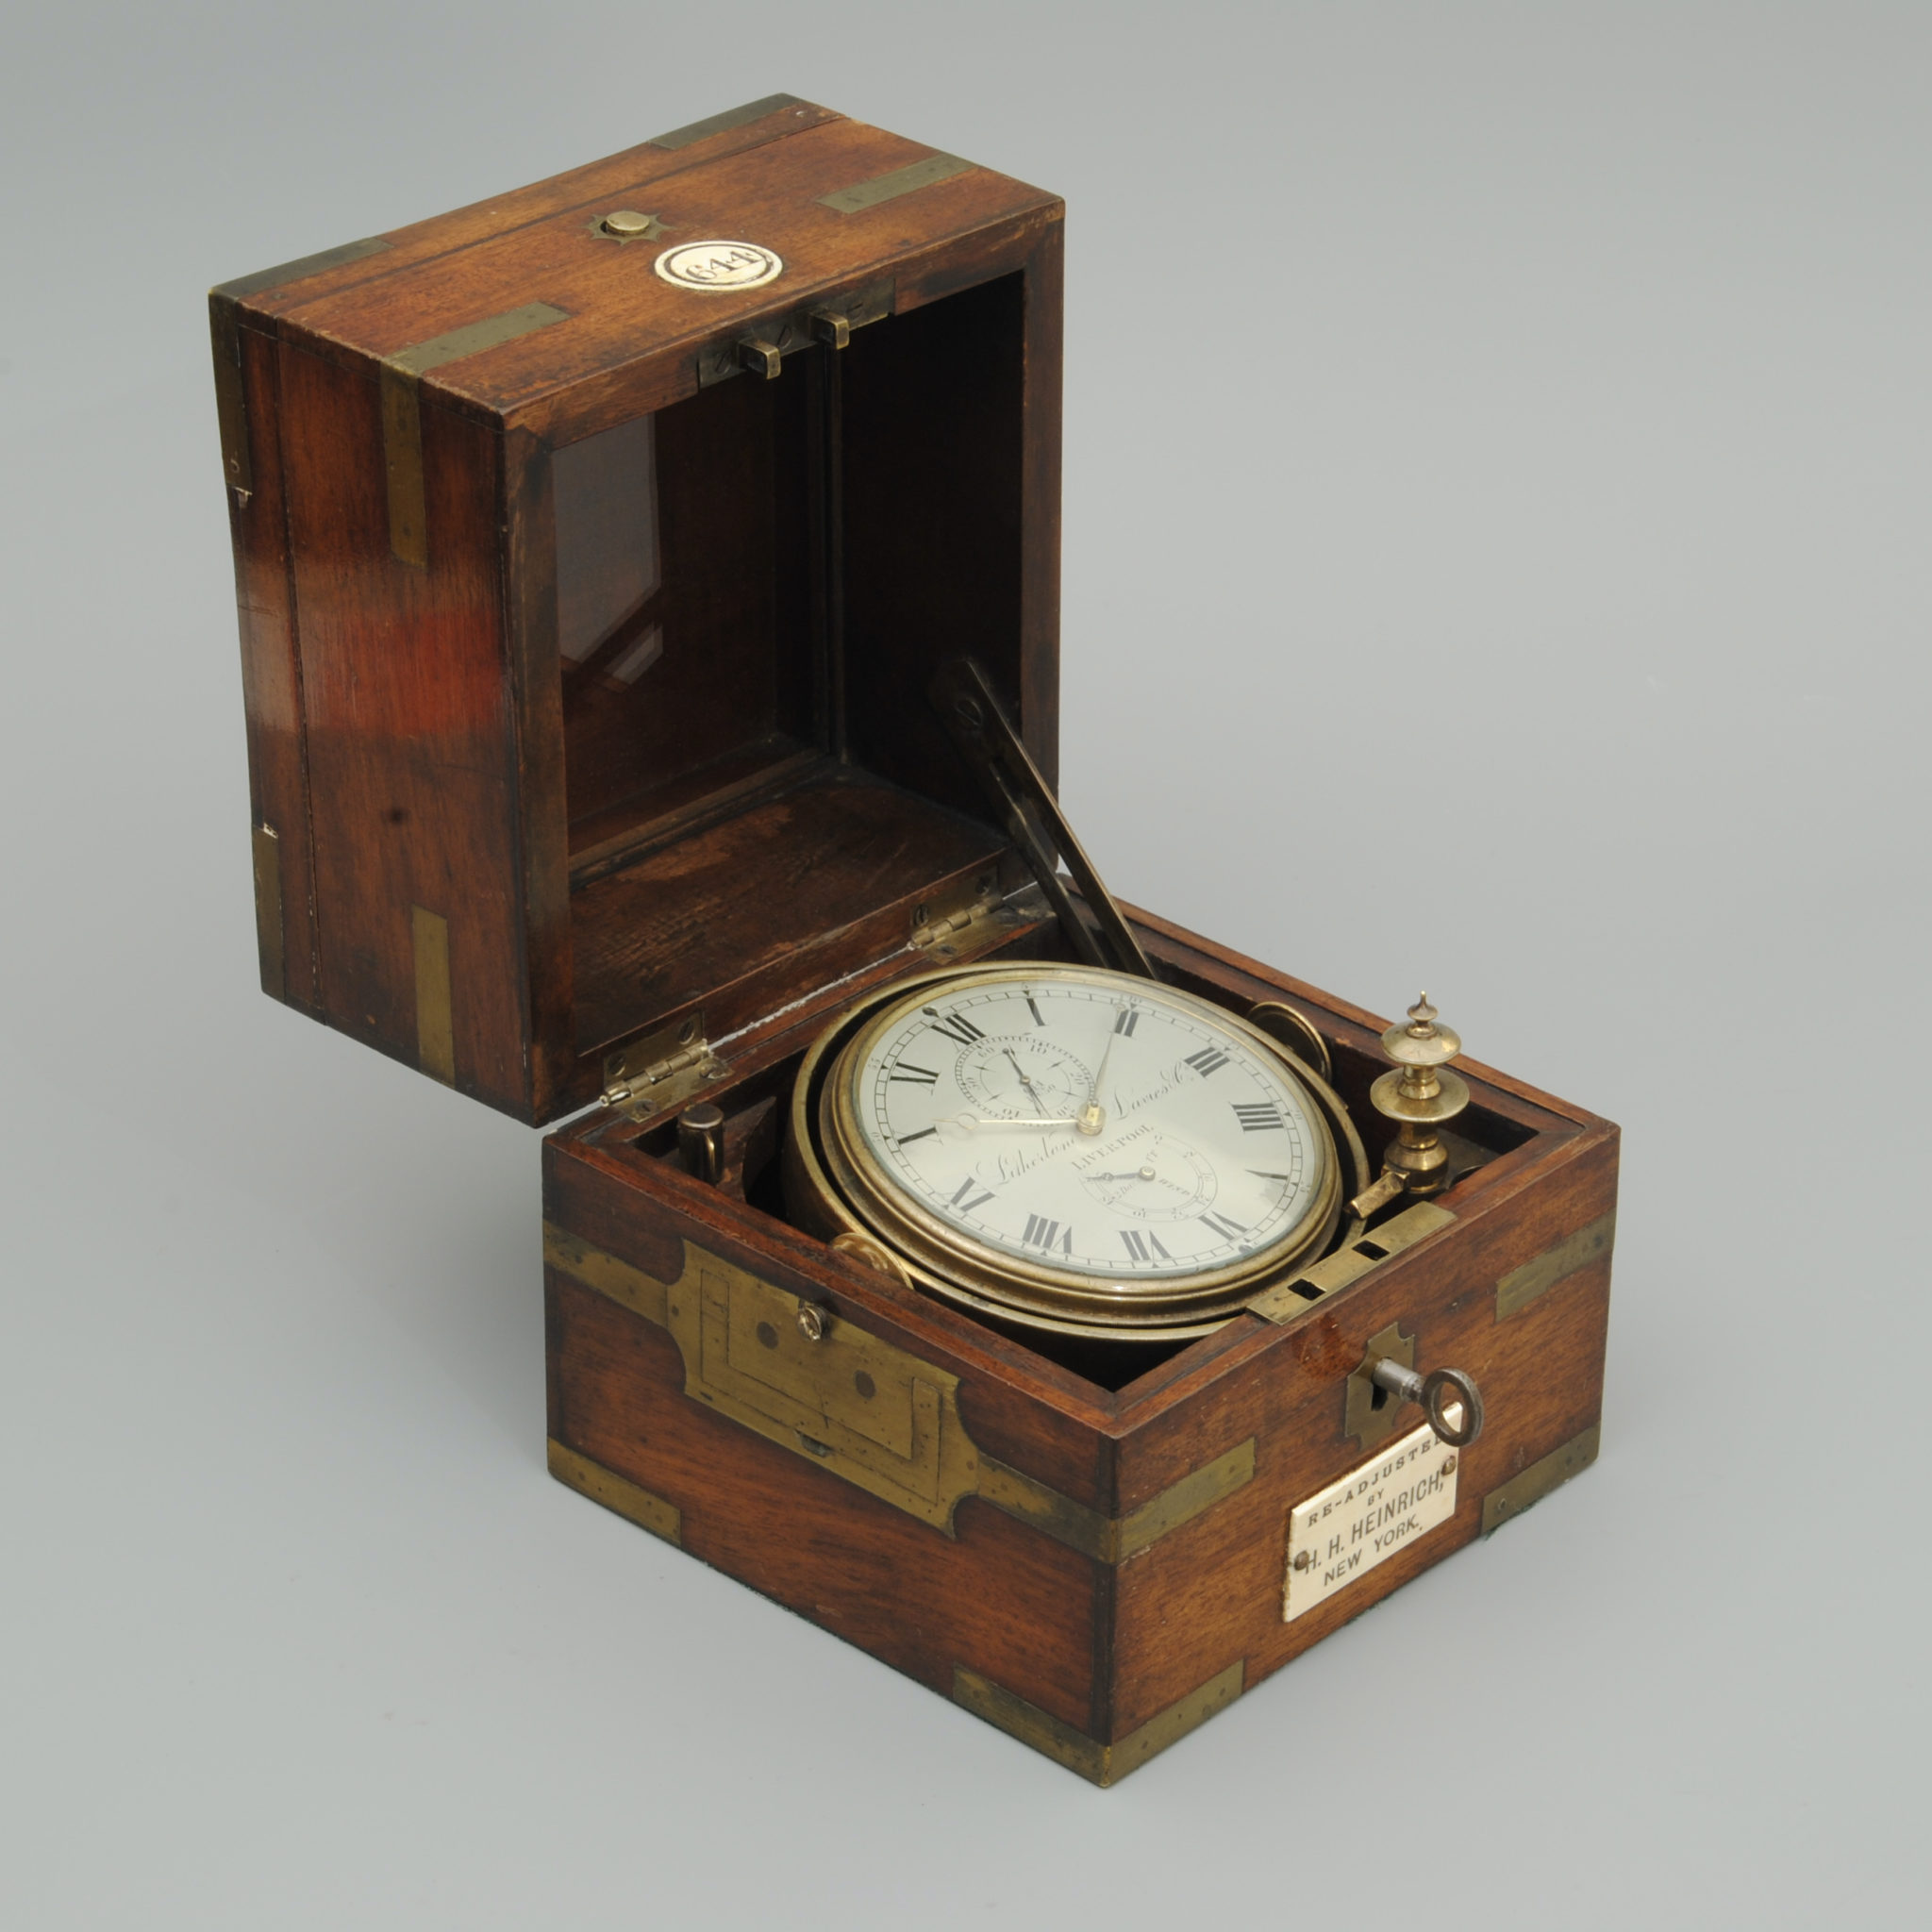 A FINE EARLY 19TH CENTURY TWO DAY MARINE CHRONOMETER BY LITHERLAND AND DAVIS, LIVERPOOL